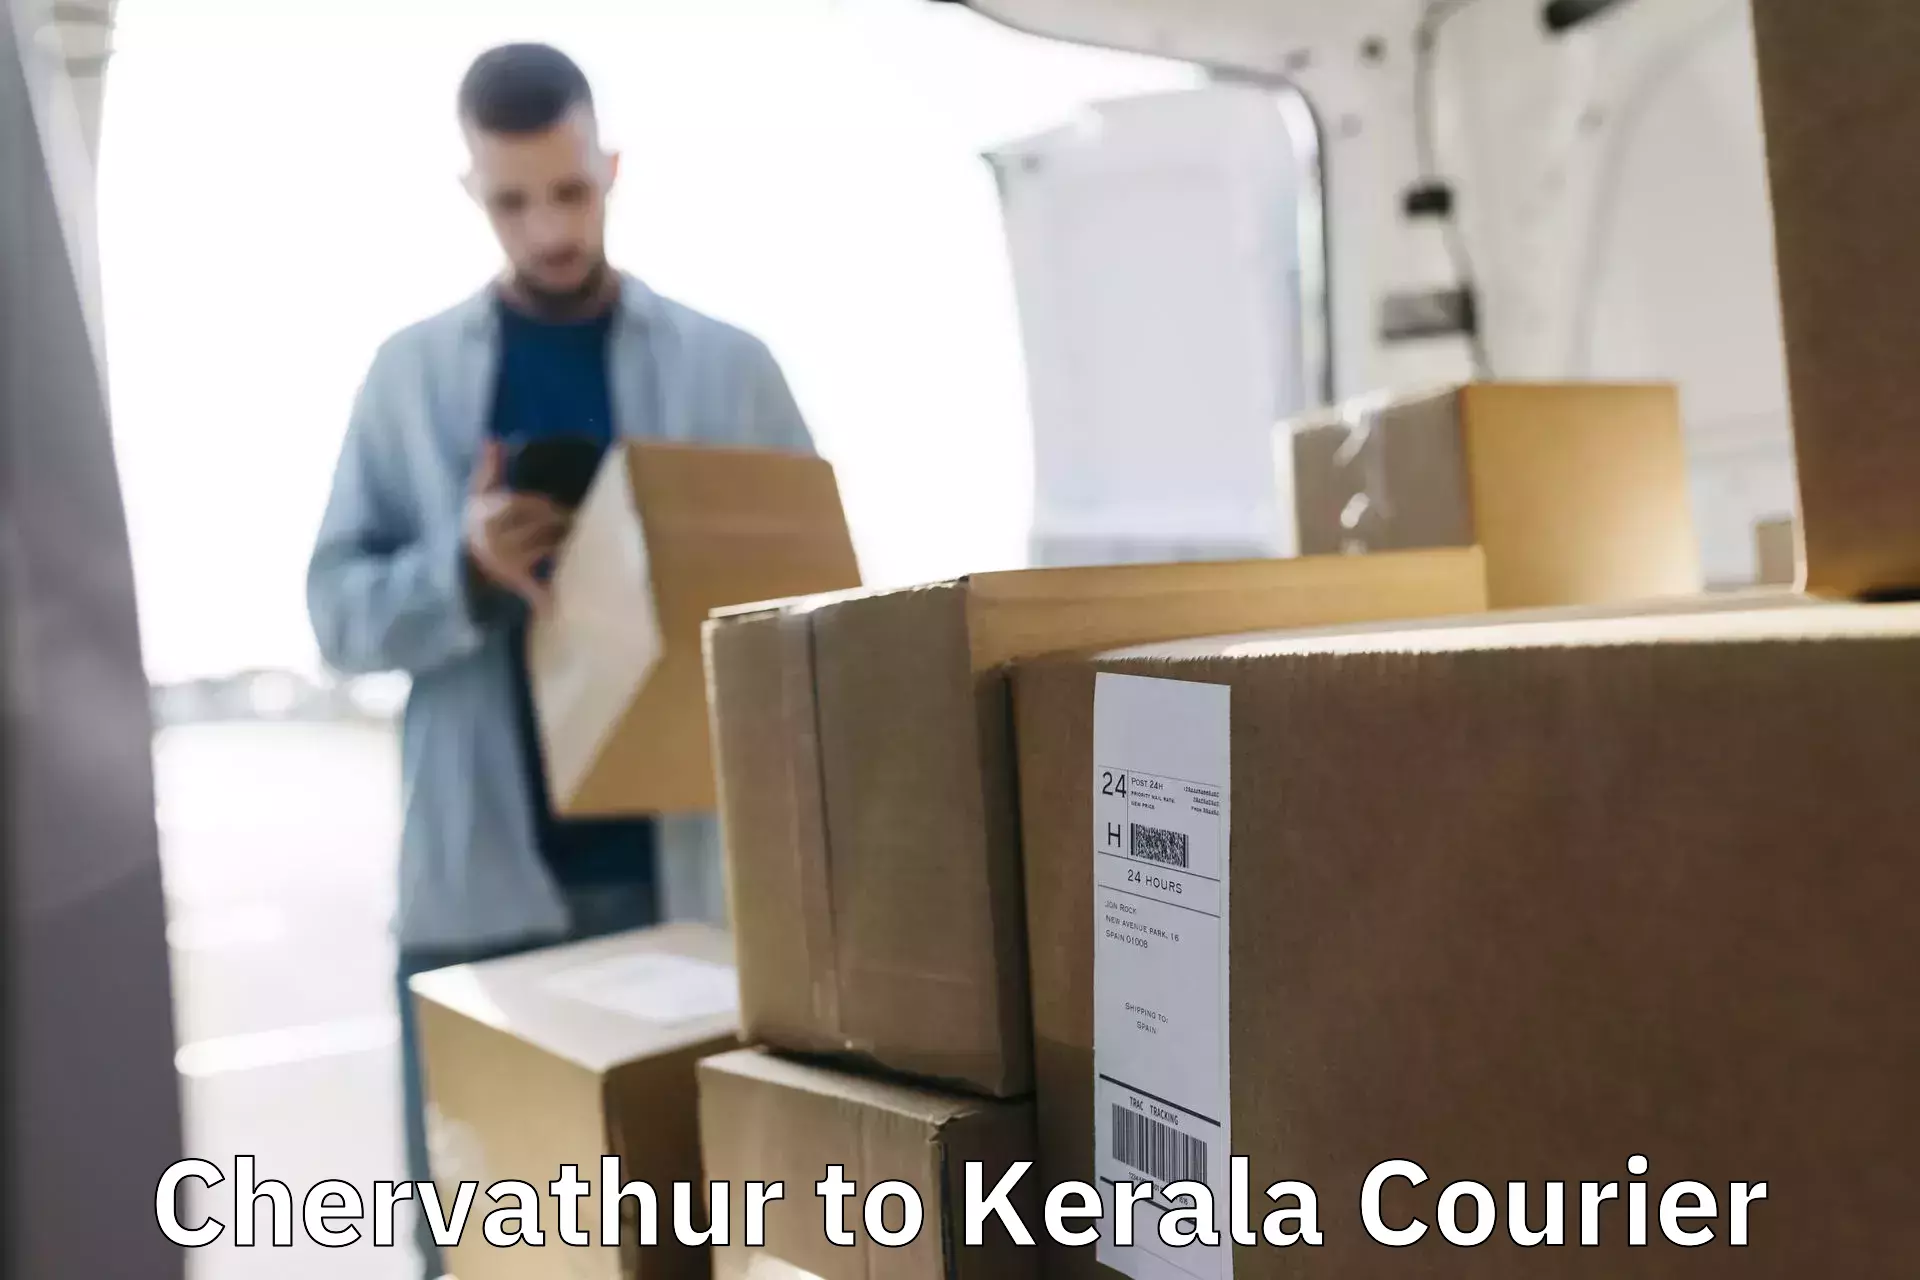 Quick dispatch service Chervathur to Kuthumkal